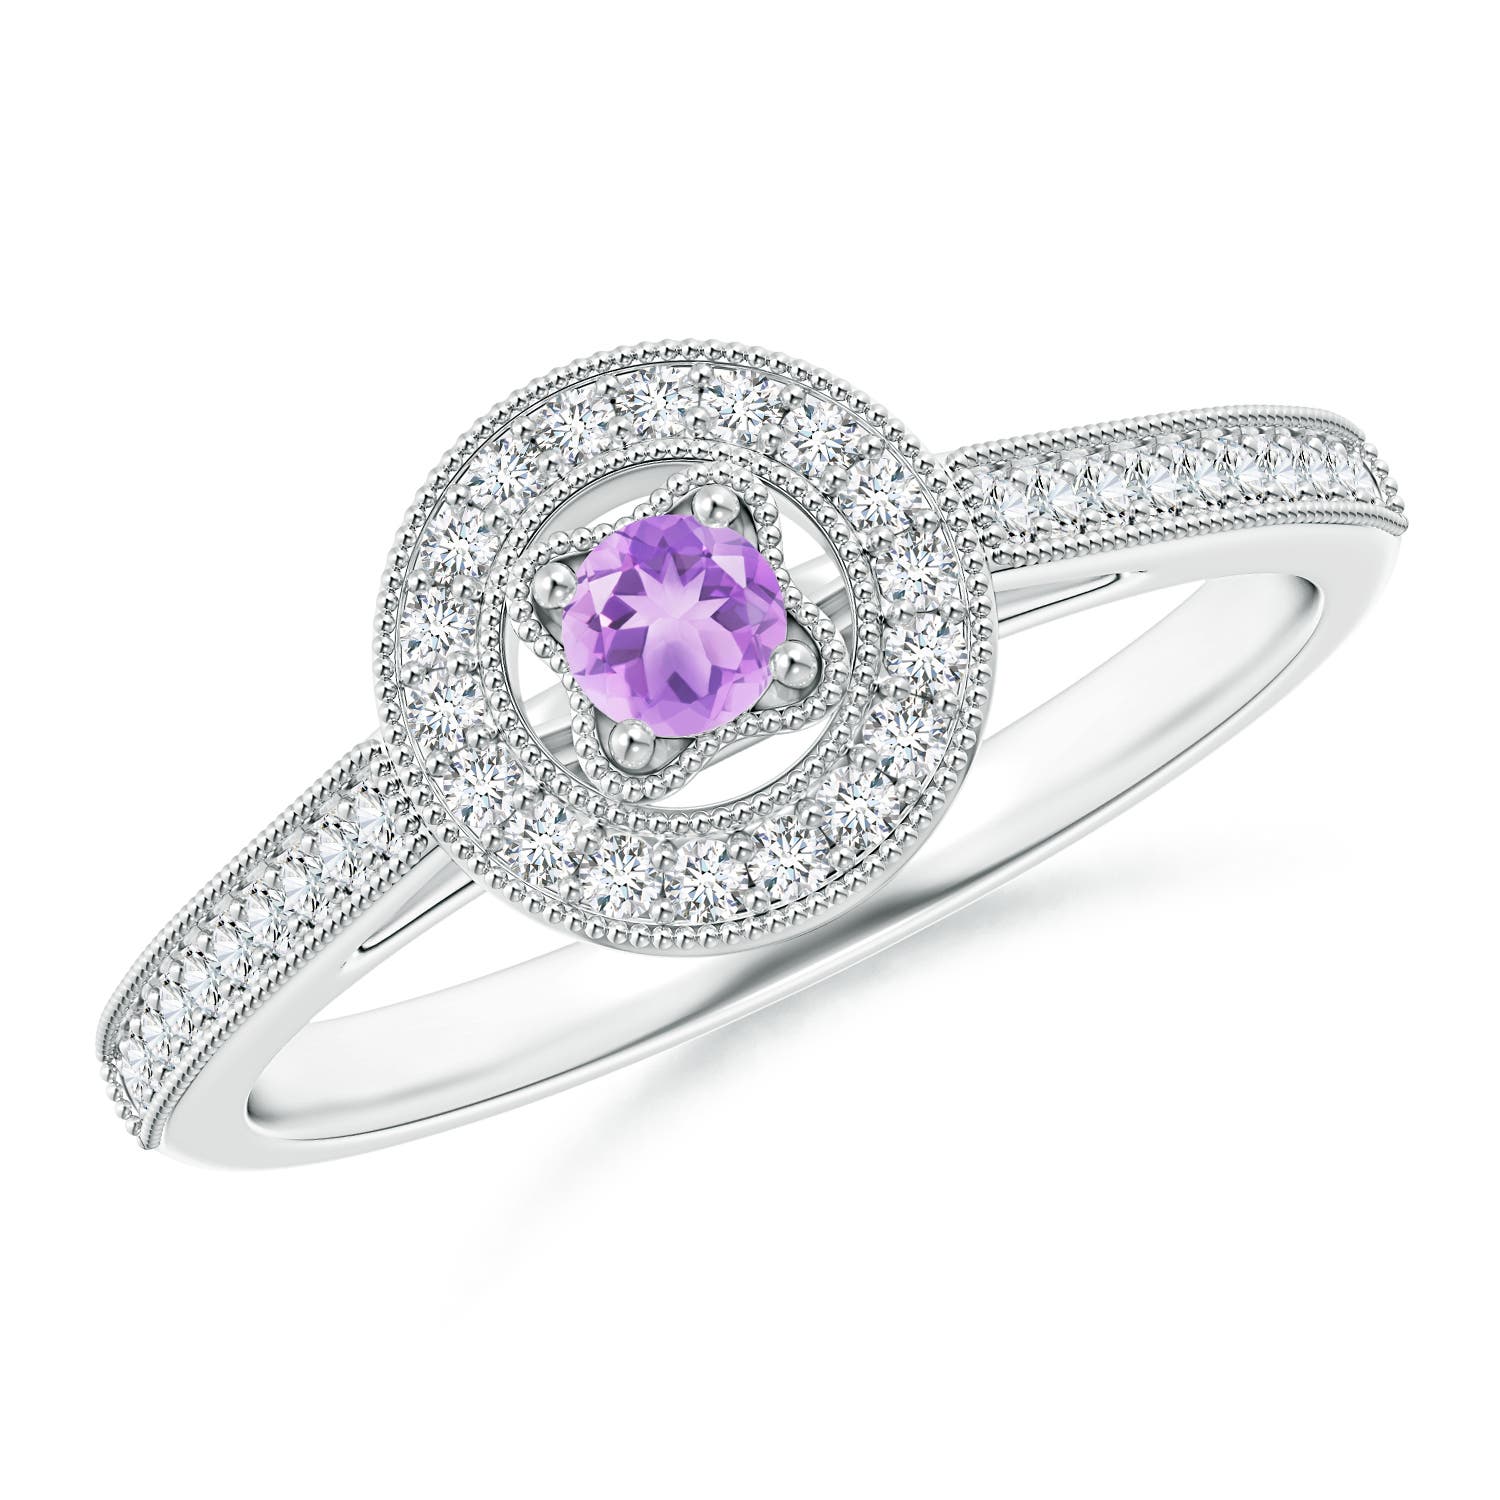 AA - Amethyst / 0.31 CT / 14 KT White Gold